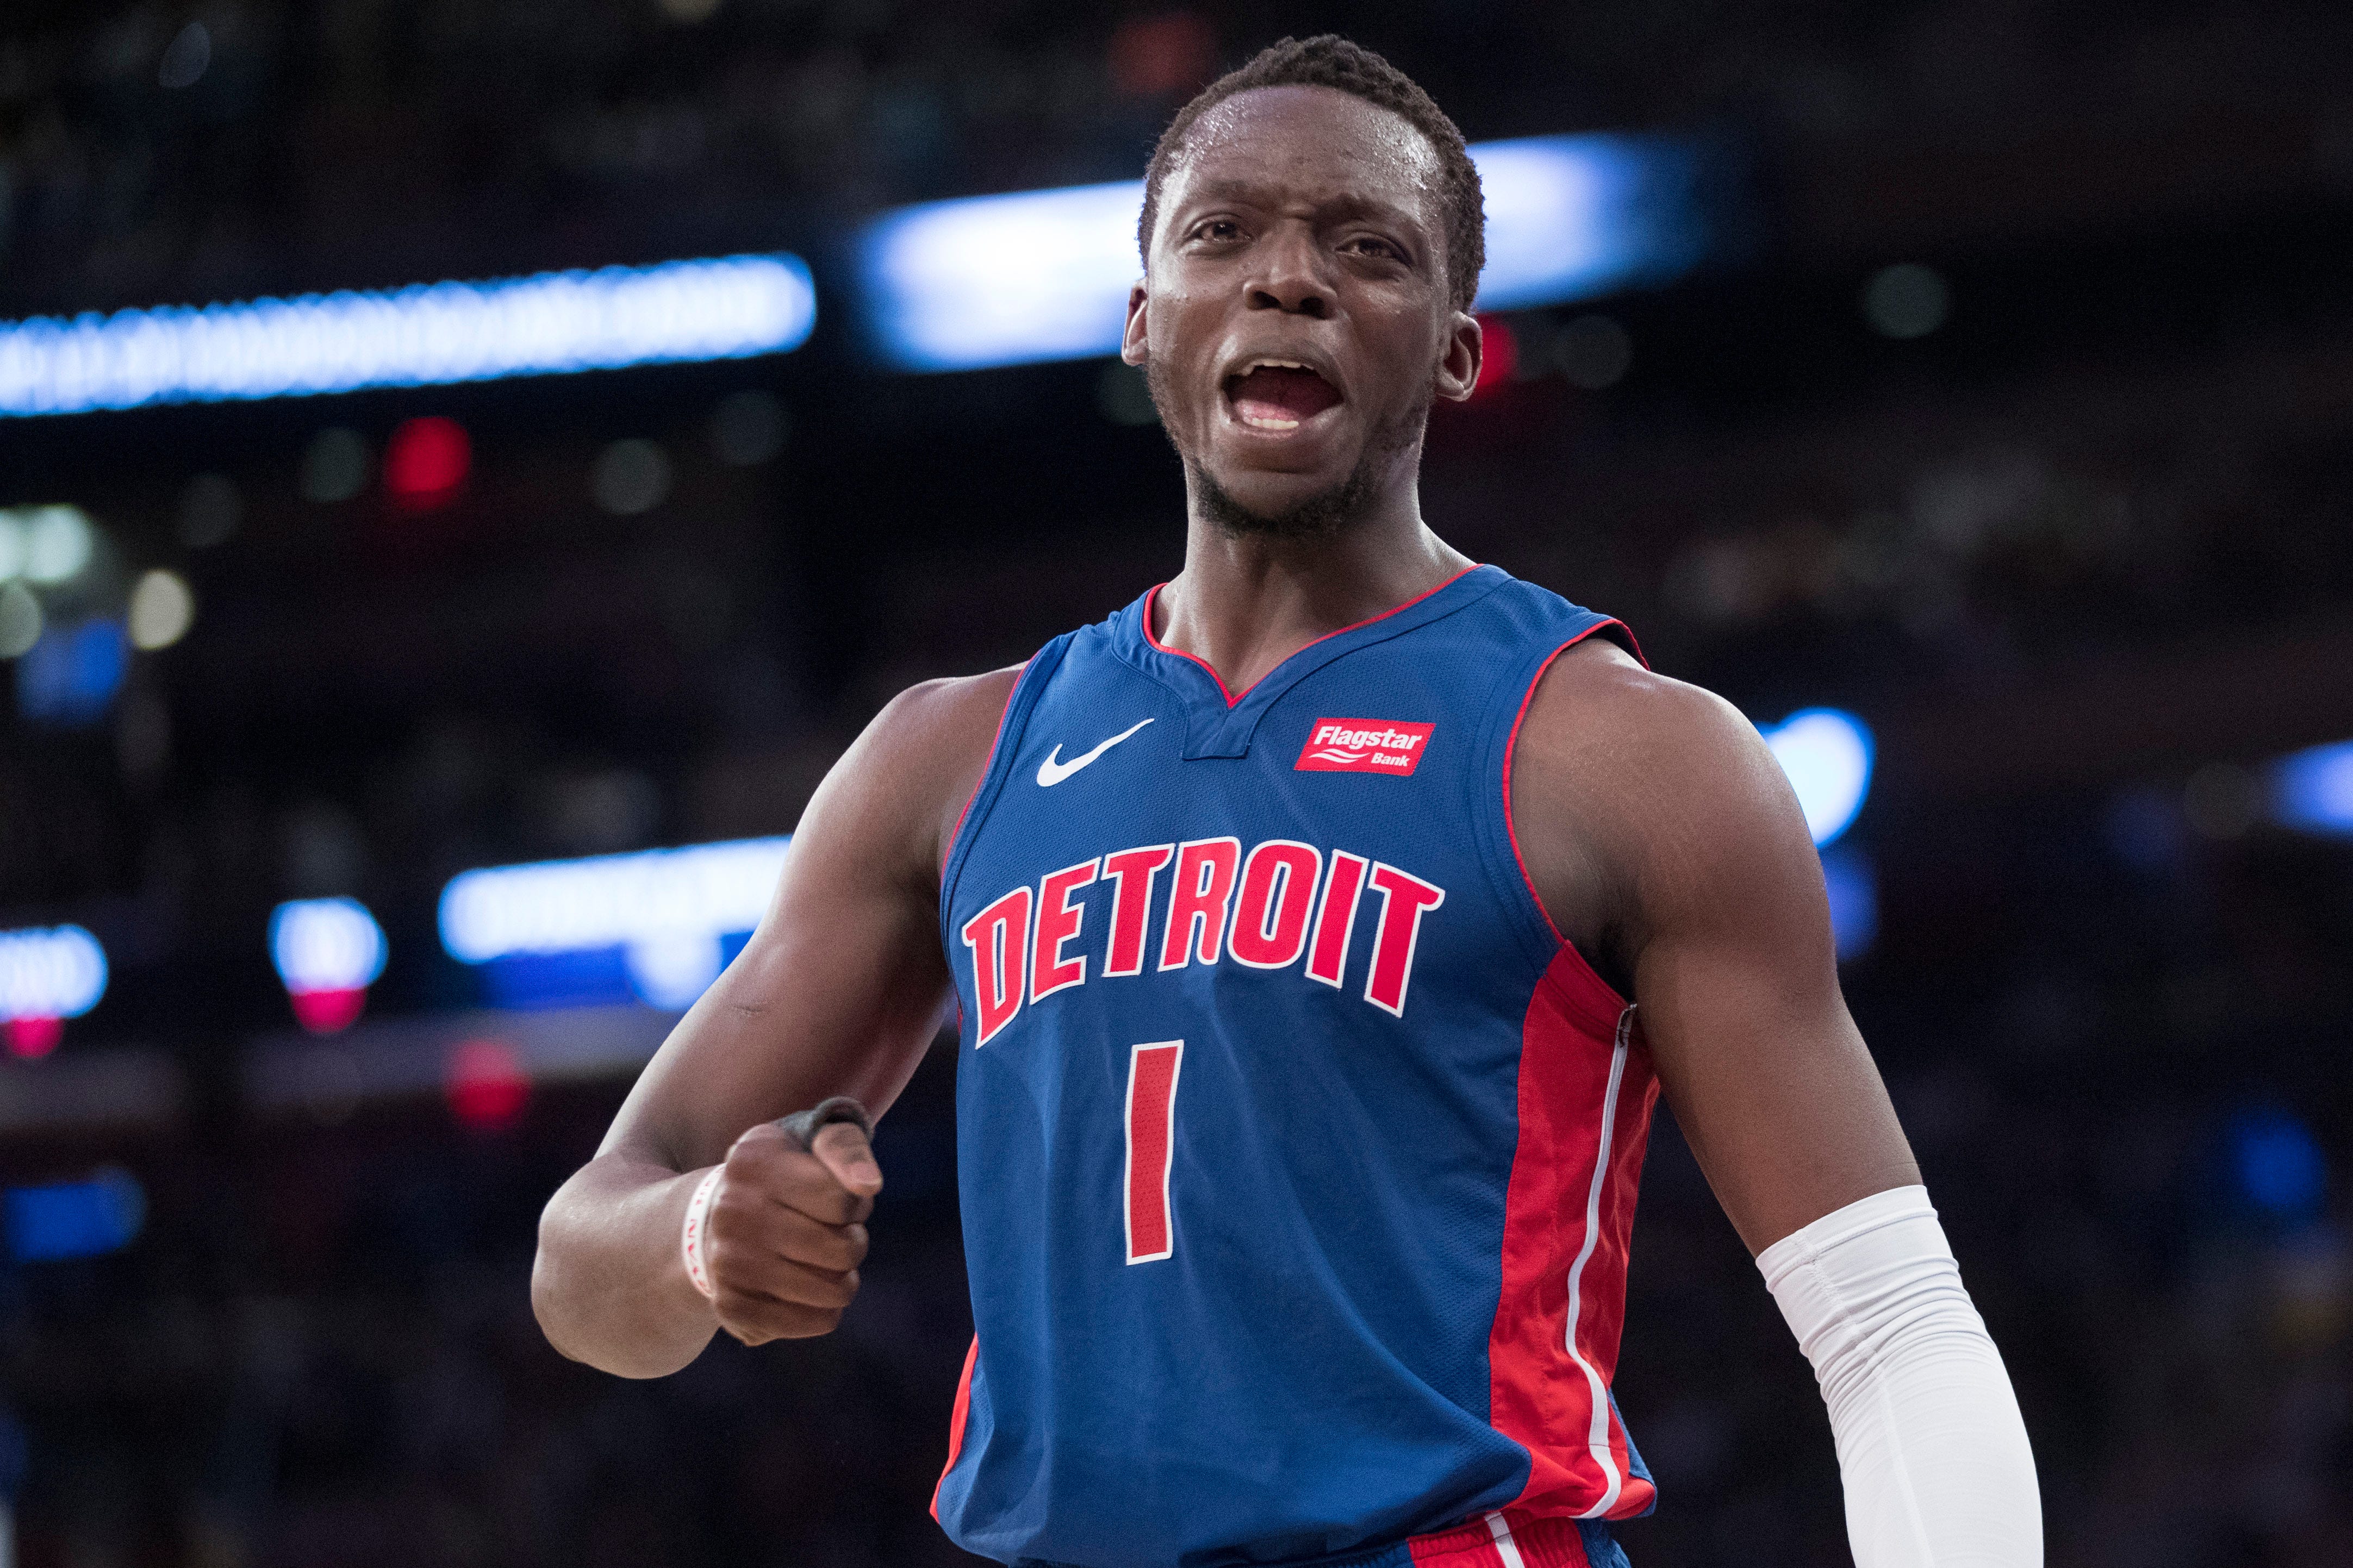 Detroit Pistons guard Reggie Jackson reacts during the first half.